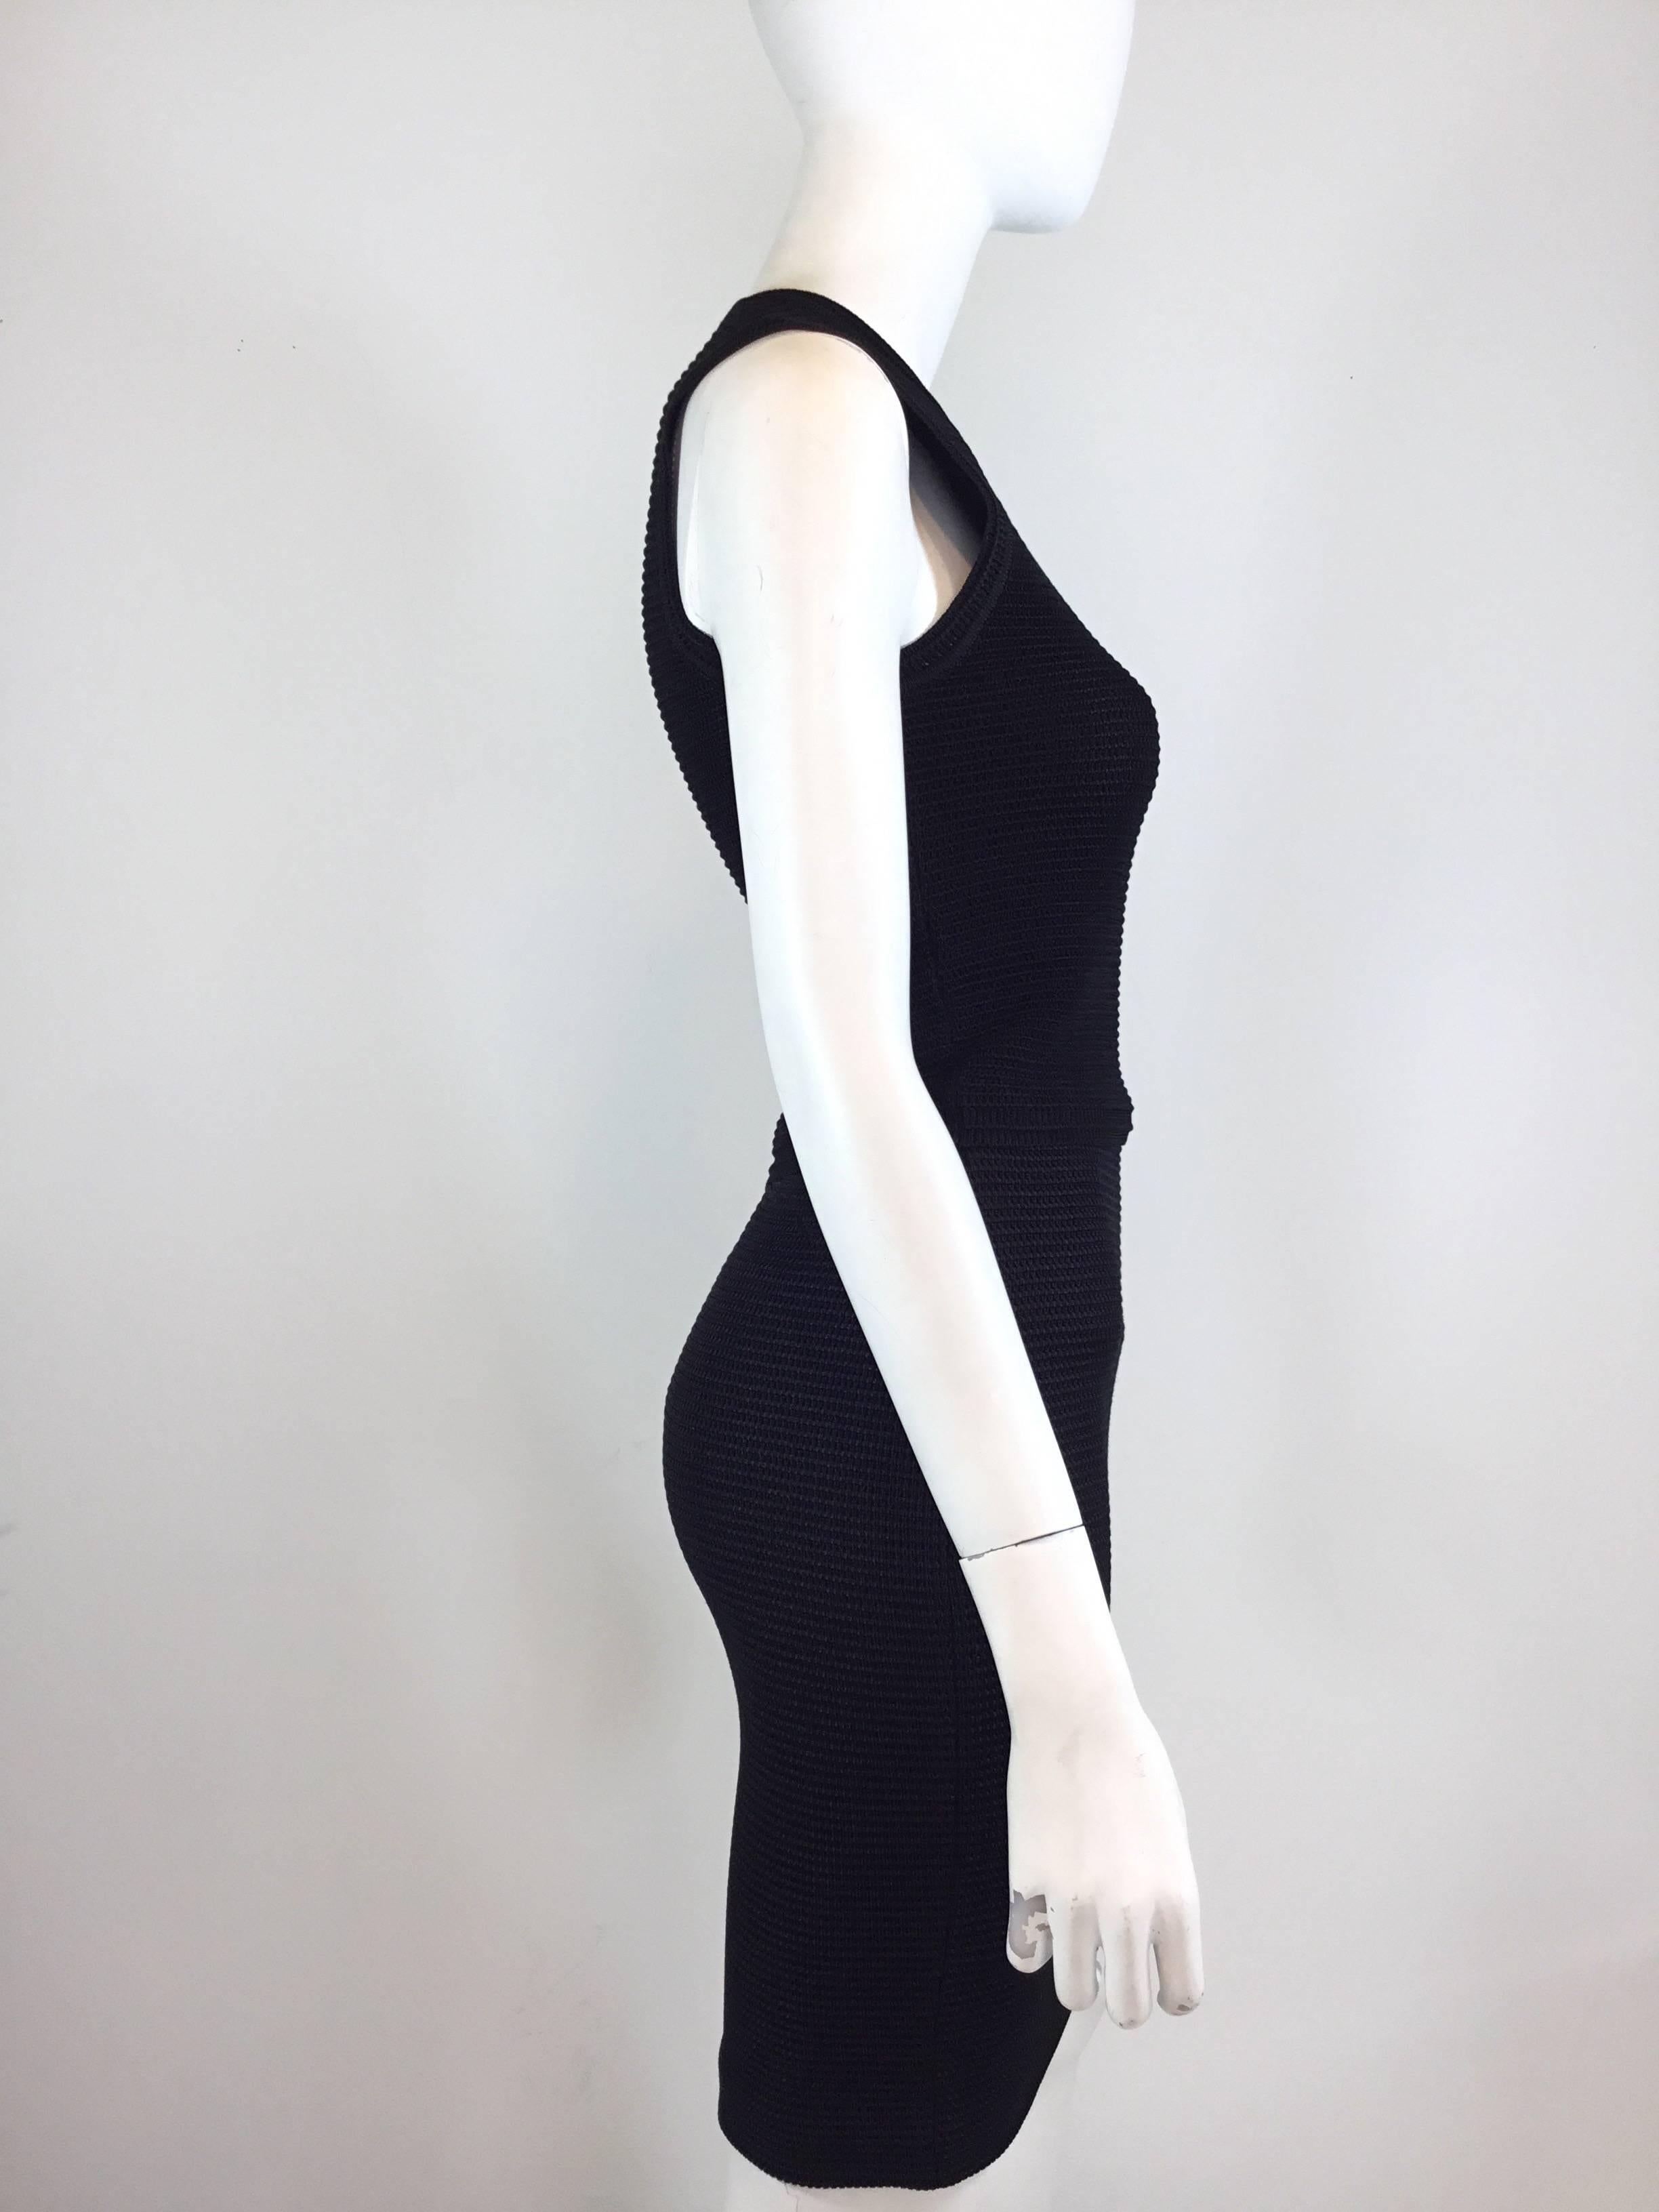 Gianni Versace Couture Bodycon Knit Skirt and Top Set Vintage For Sale ...